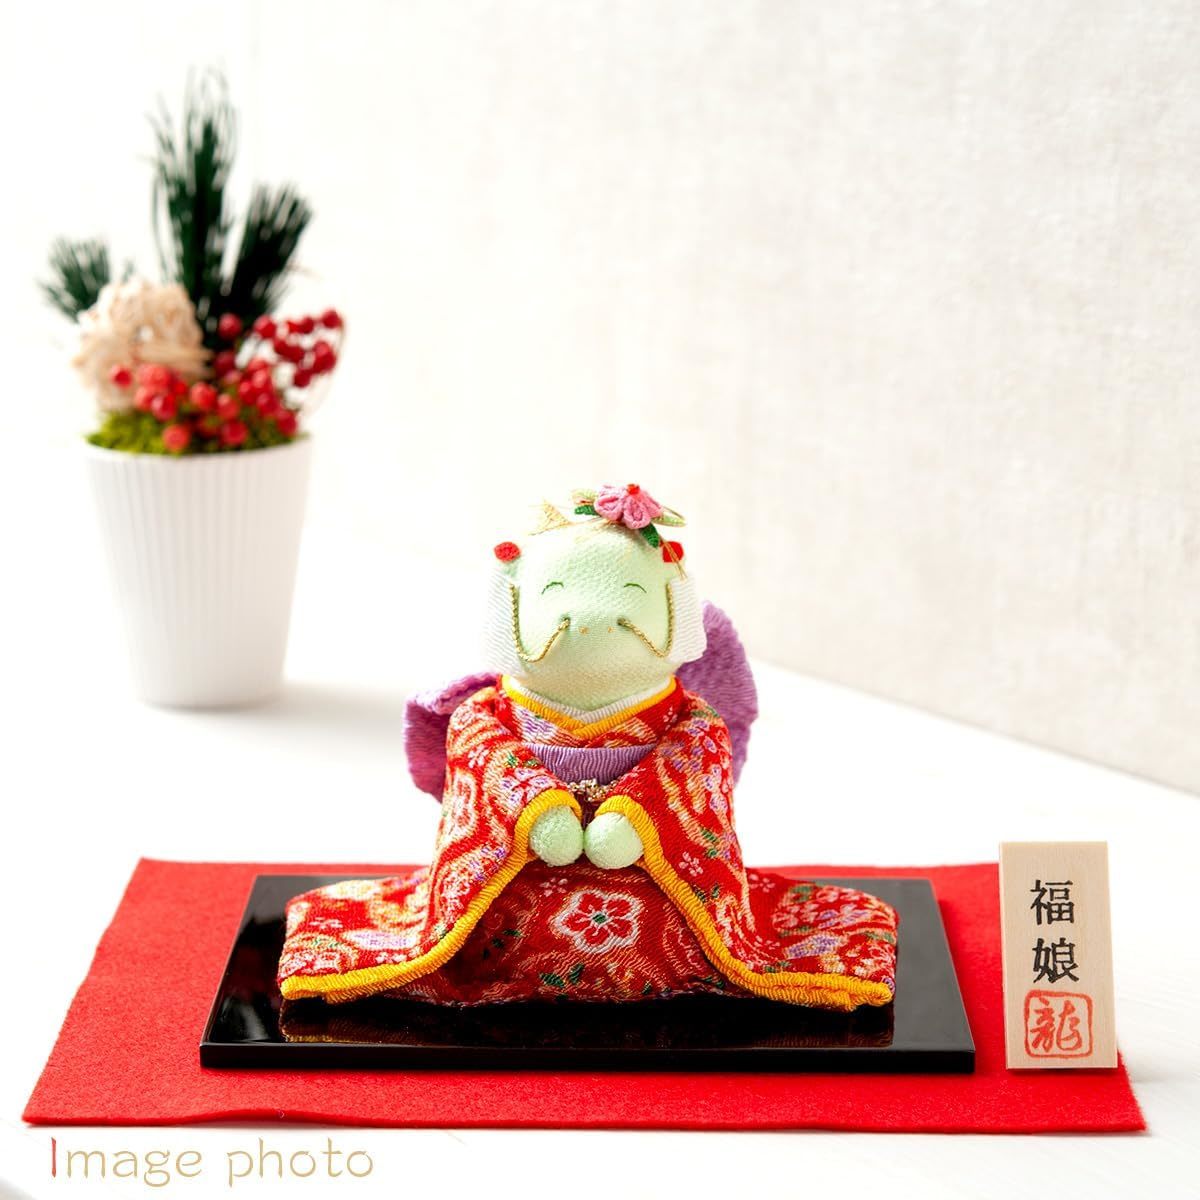  luck . san * crepe-de-chine . spring decoration * New Year decoration * laughing .. luck *ryuukodou made in Japan R-54